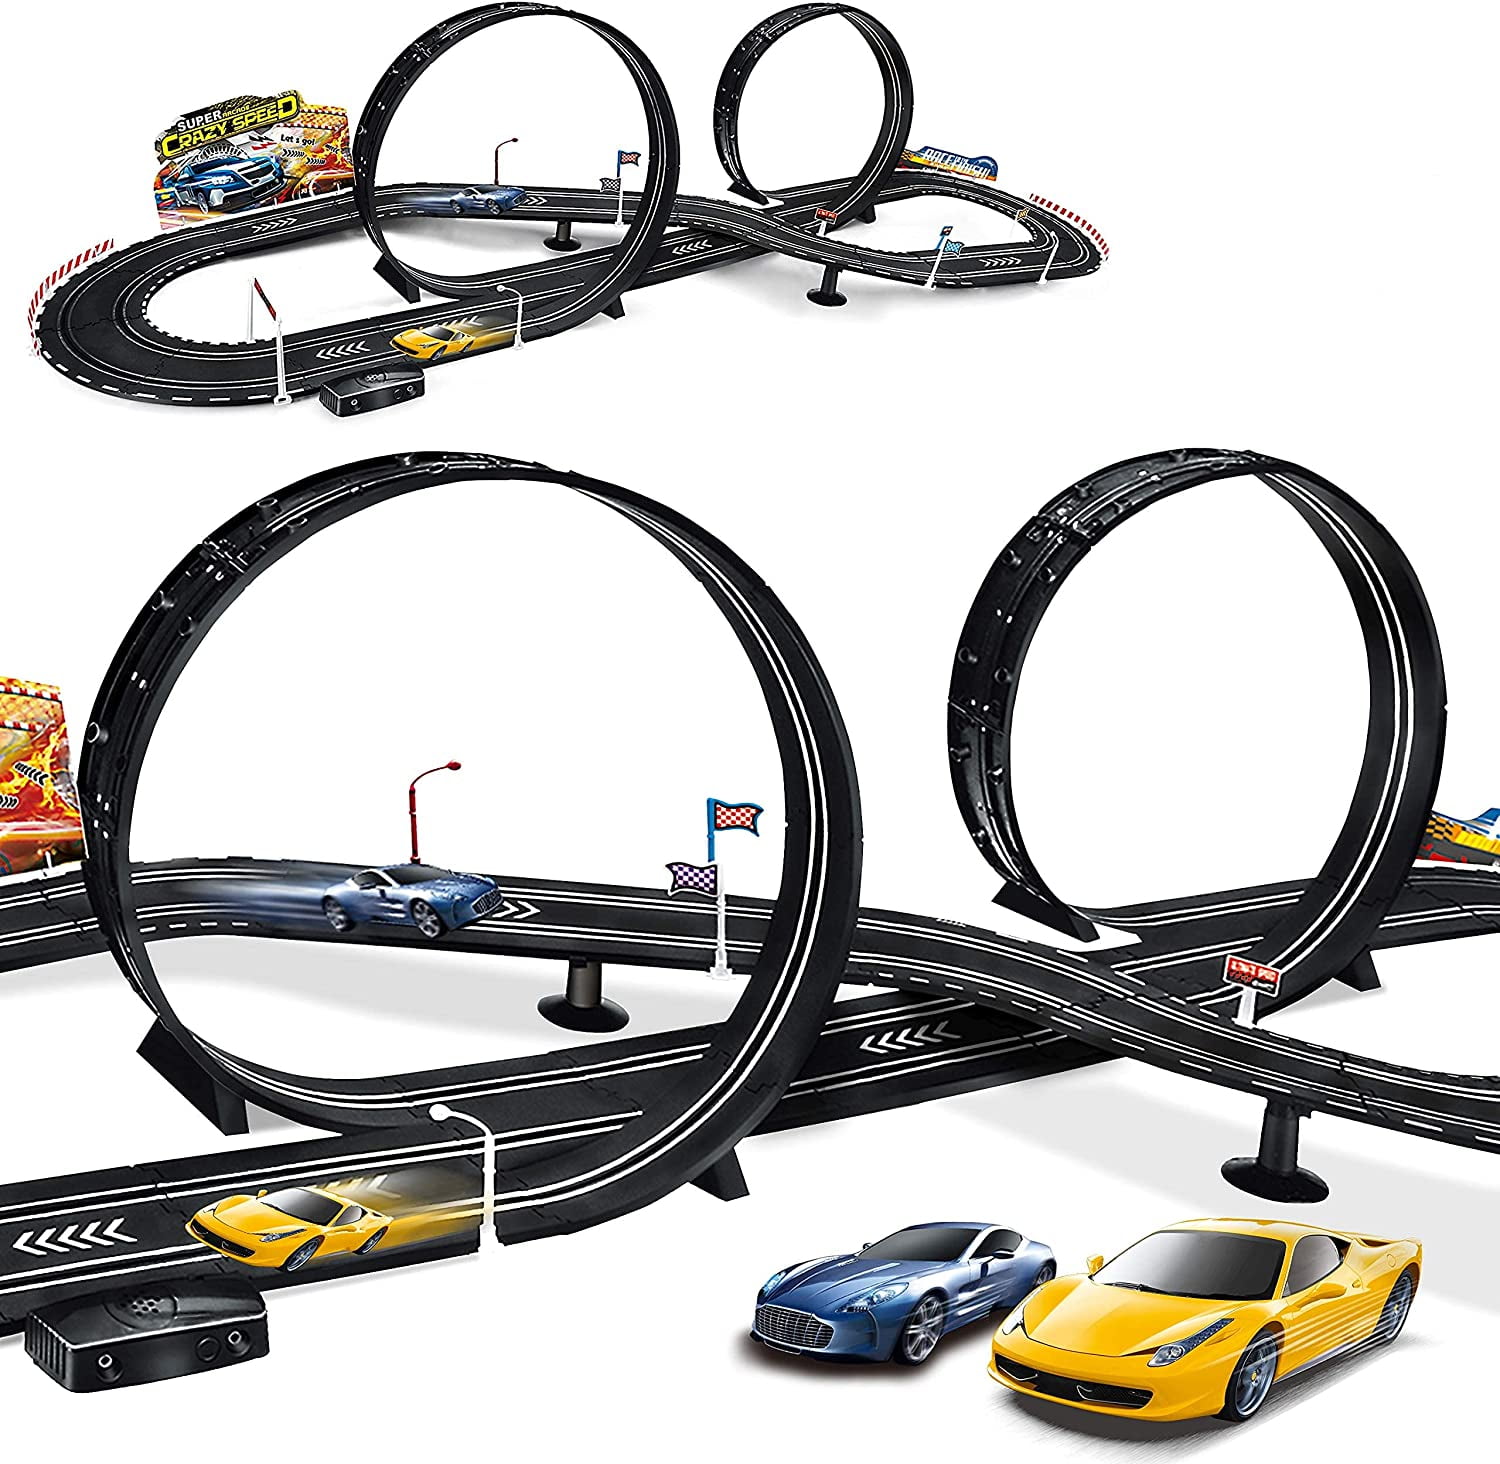 LINGLING Slot Car Race Tracks Toy Electric Track Racing Set Child Track Small Train Car Boy and Girl Educational Toys Birthday Gift